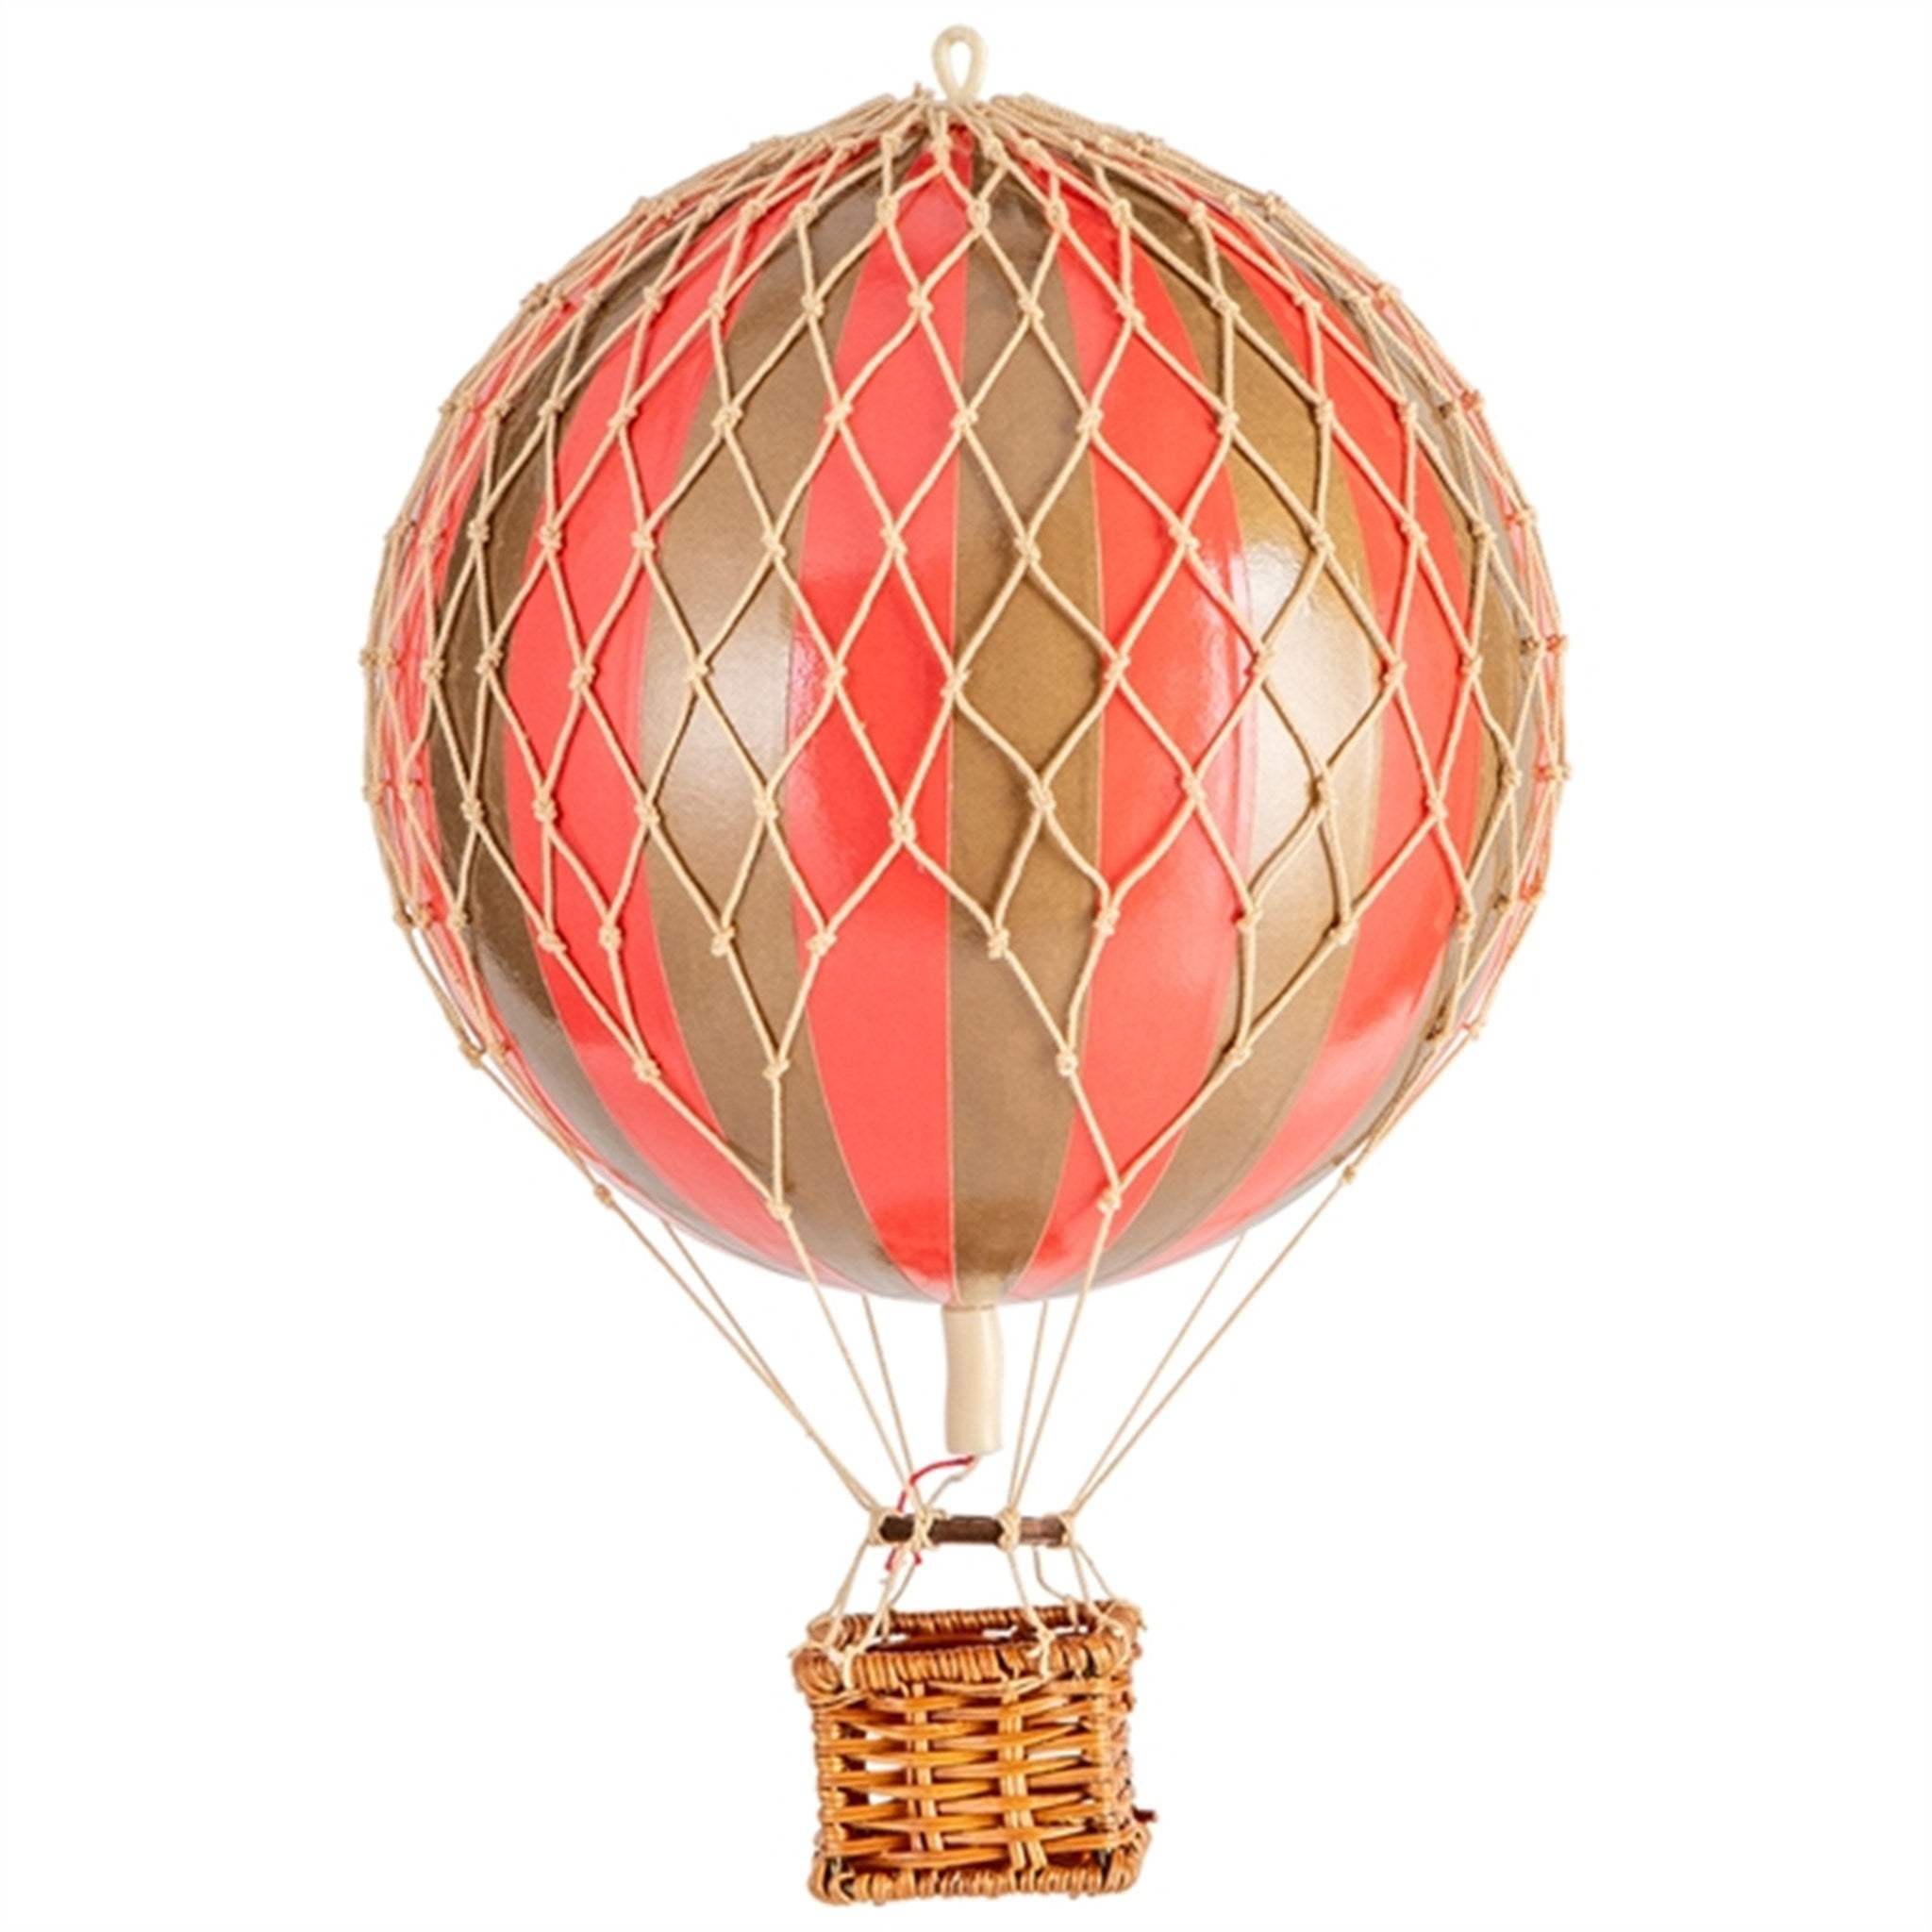 Authentic Models Balloon Red Gold 18 cm